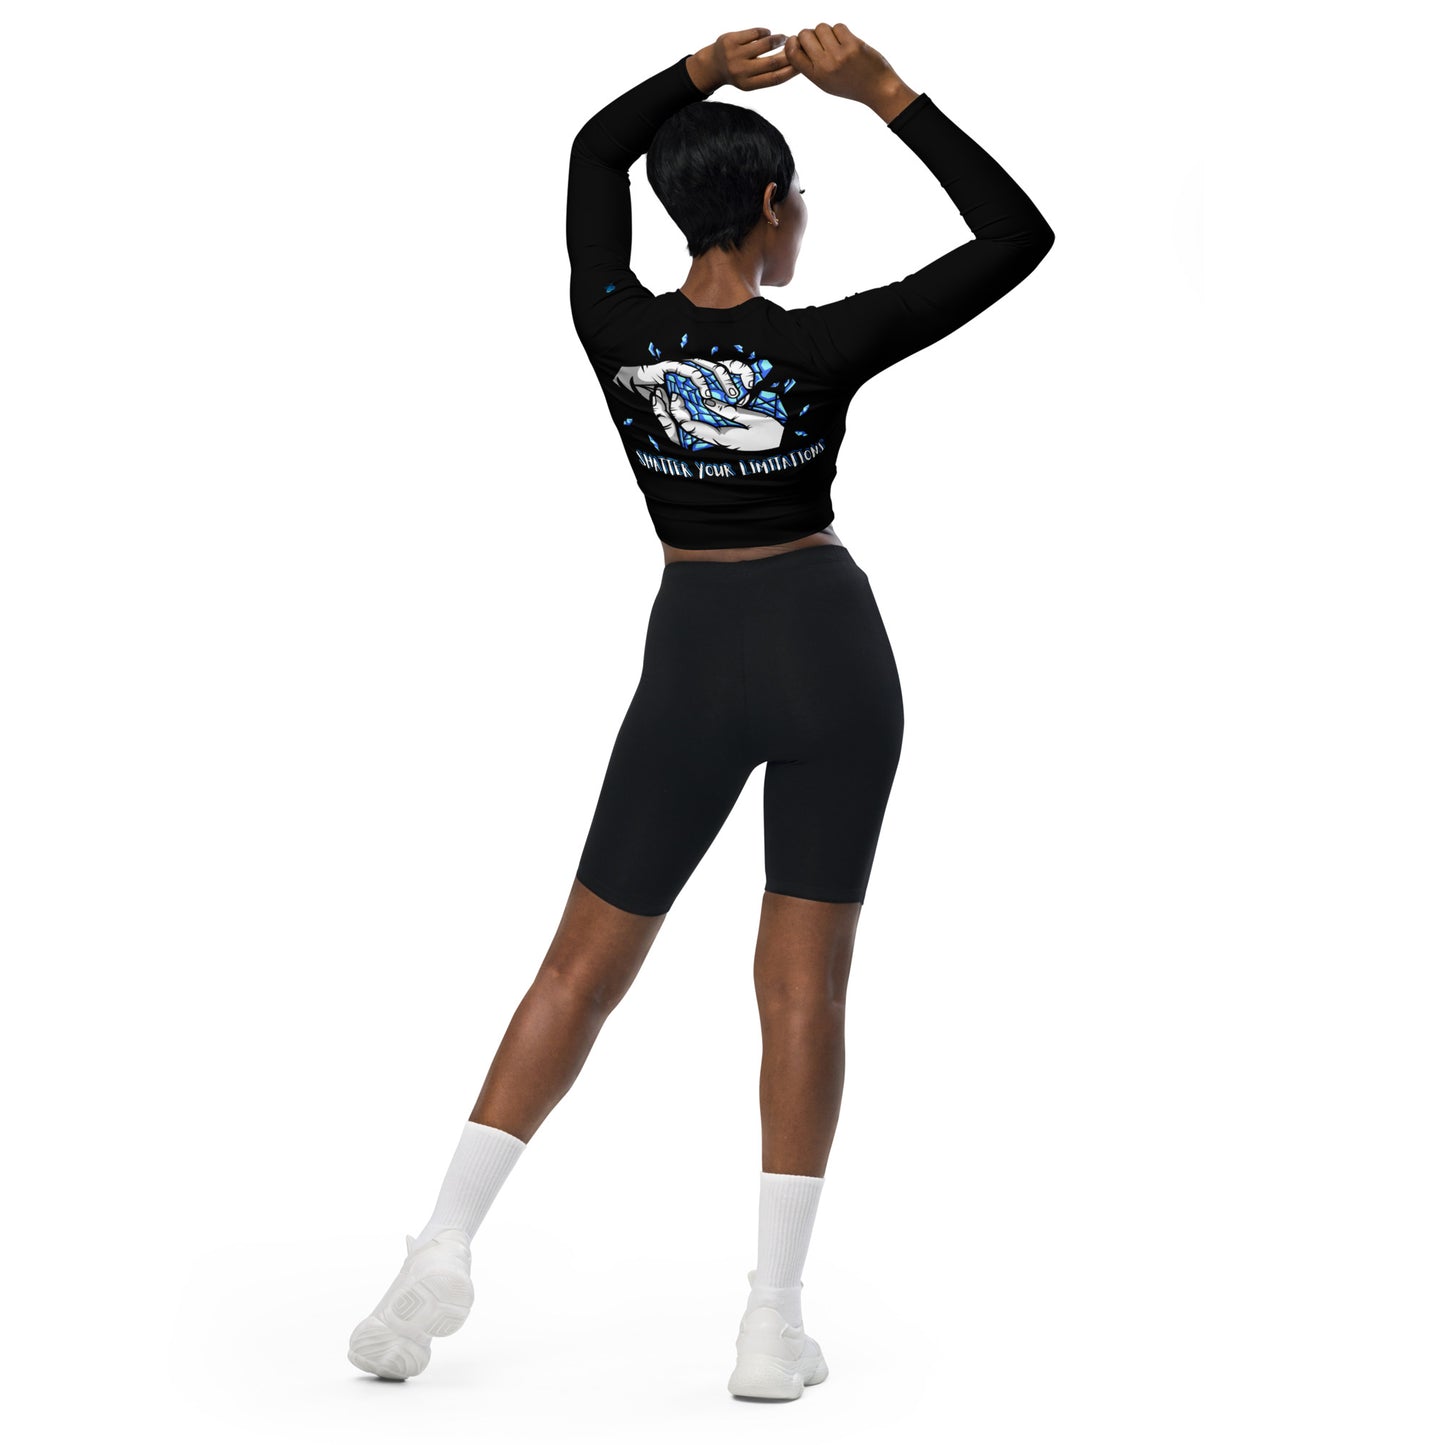 "Shatter Your Limitations" long-sleeve crop top - Apply Pressure Fitness